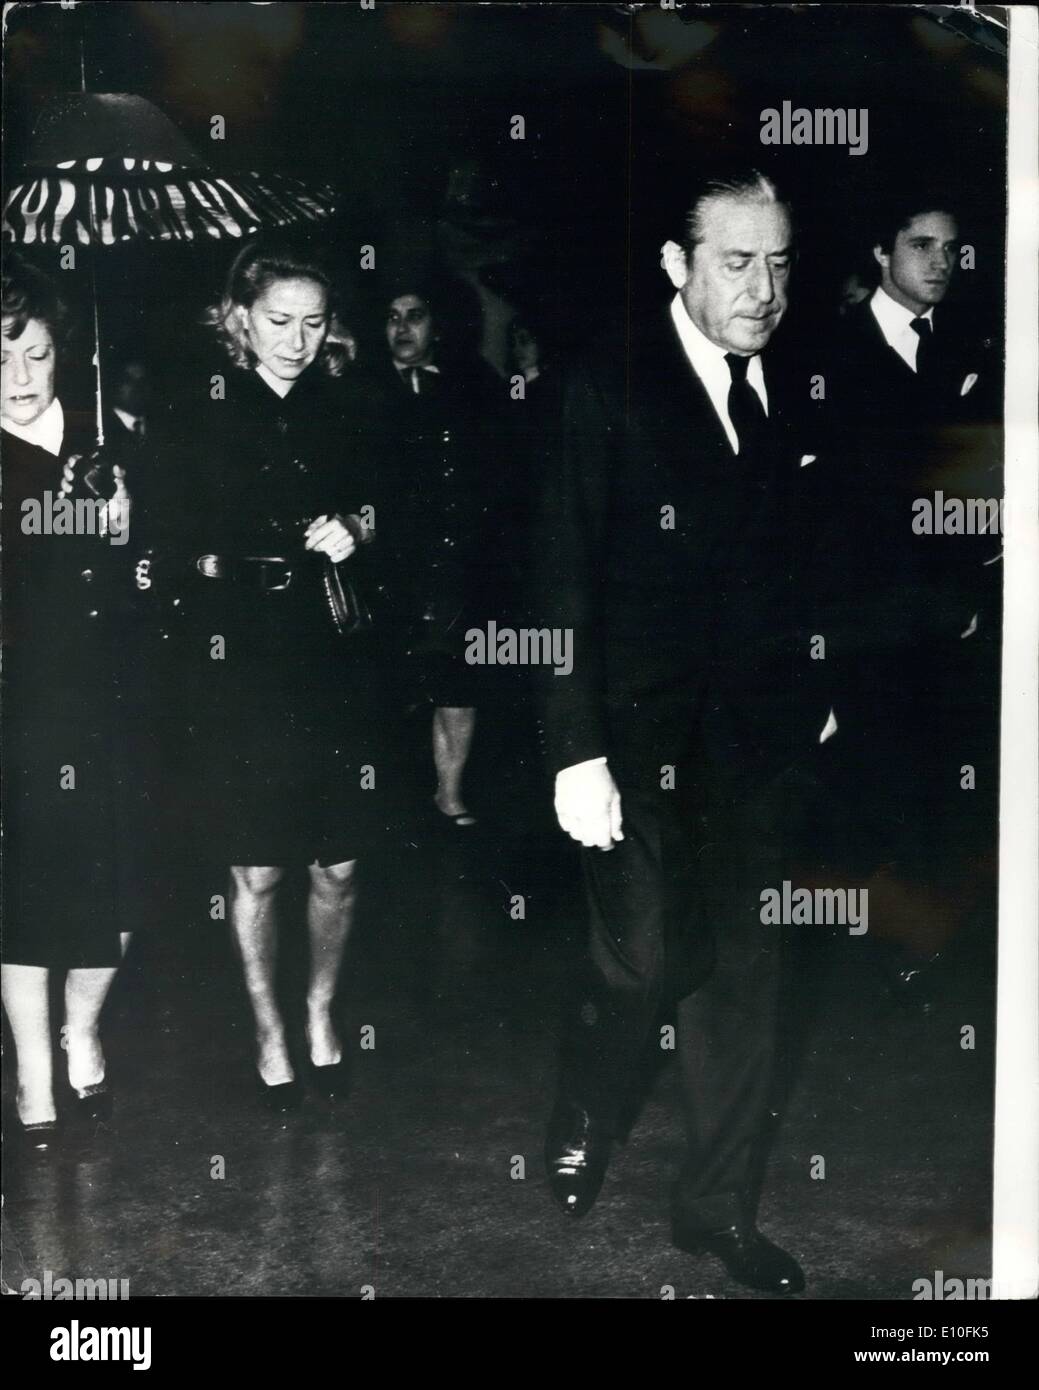 Jan. 01, 1973 - Death of Alexander Onassis.: Alexander Onassis, son of  Greek shipowner Aristotle Onassis, died on Wednesday following a plane crash  at Athens. Photo shows Pictured on the occassion when